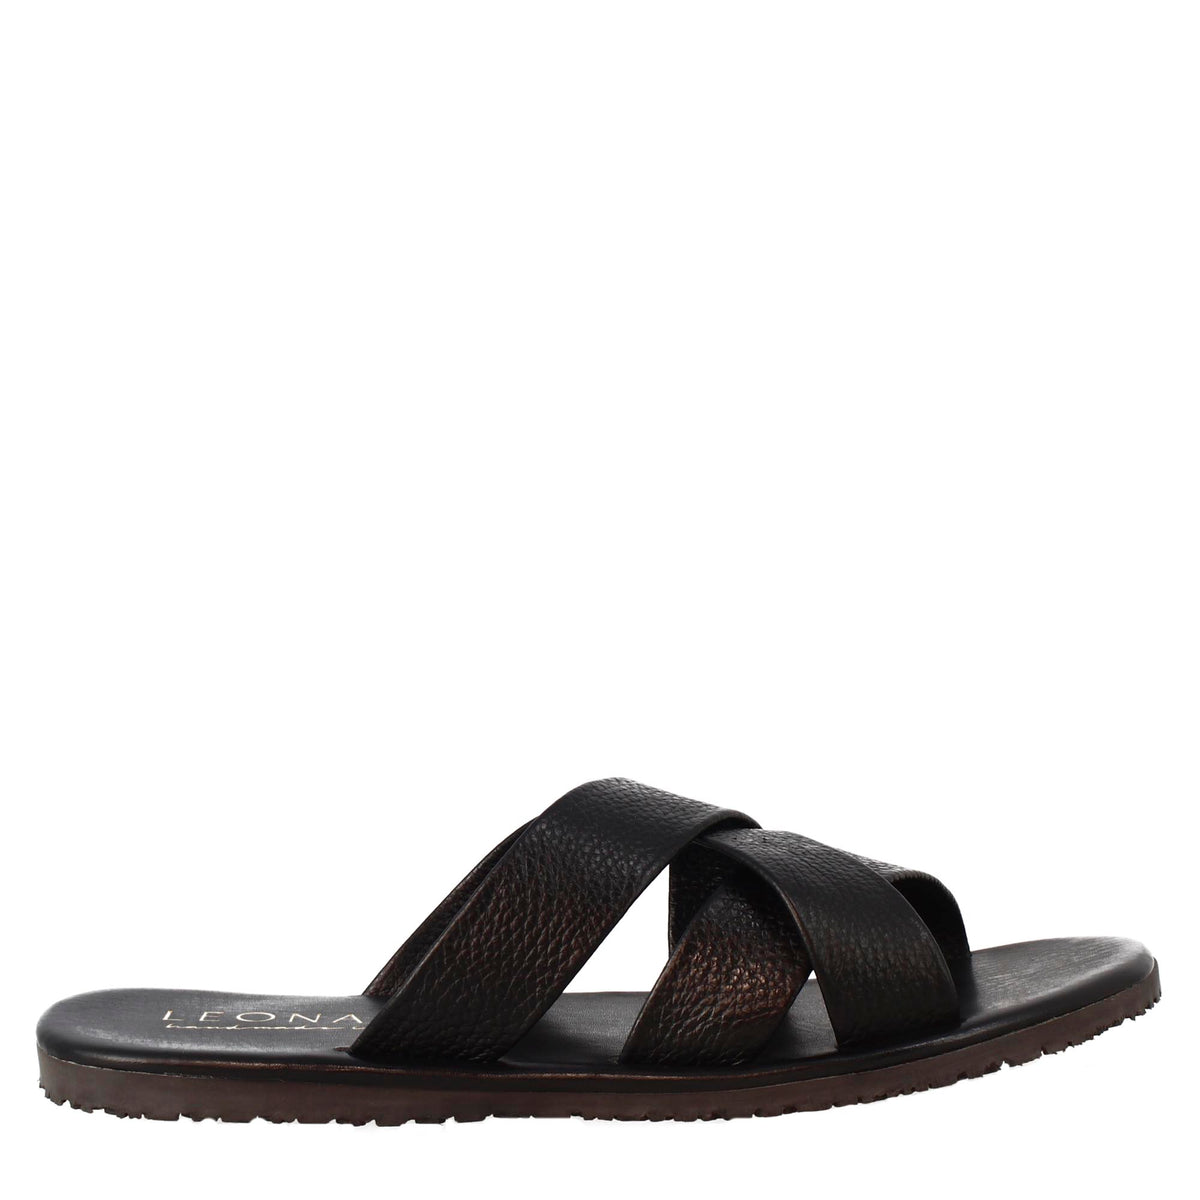 Men's slipper sandals with three crossed bands handmade in black leather